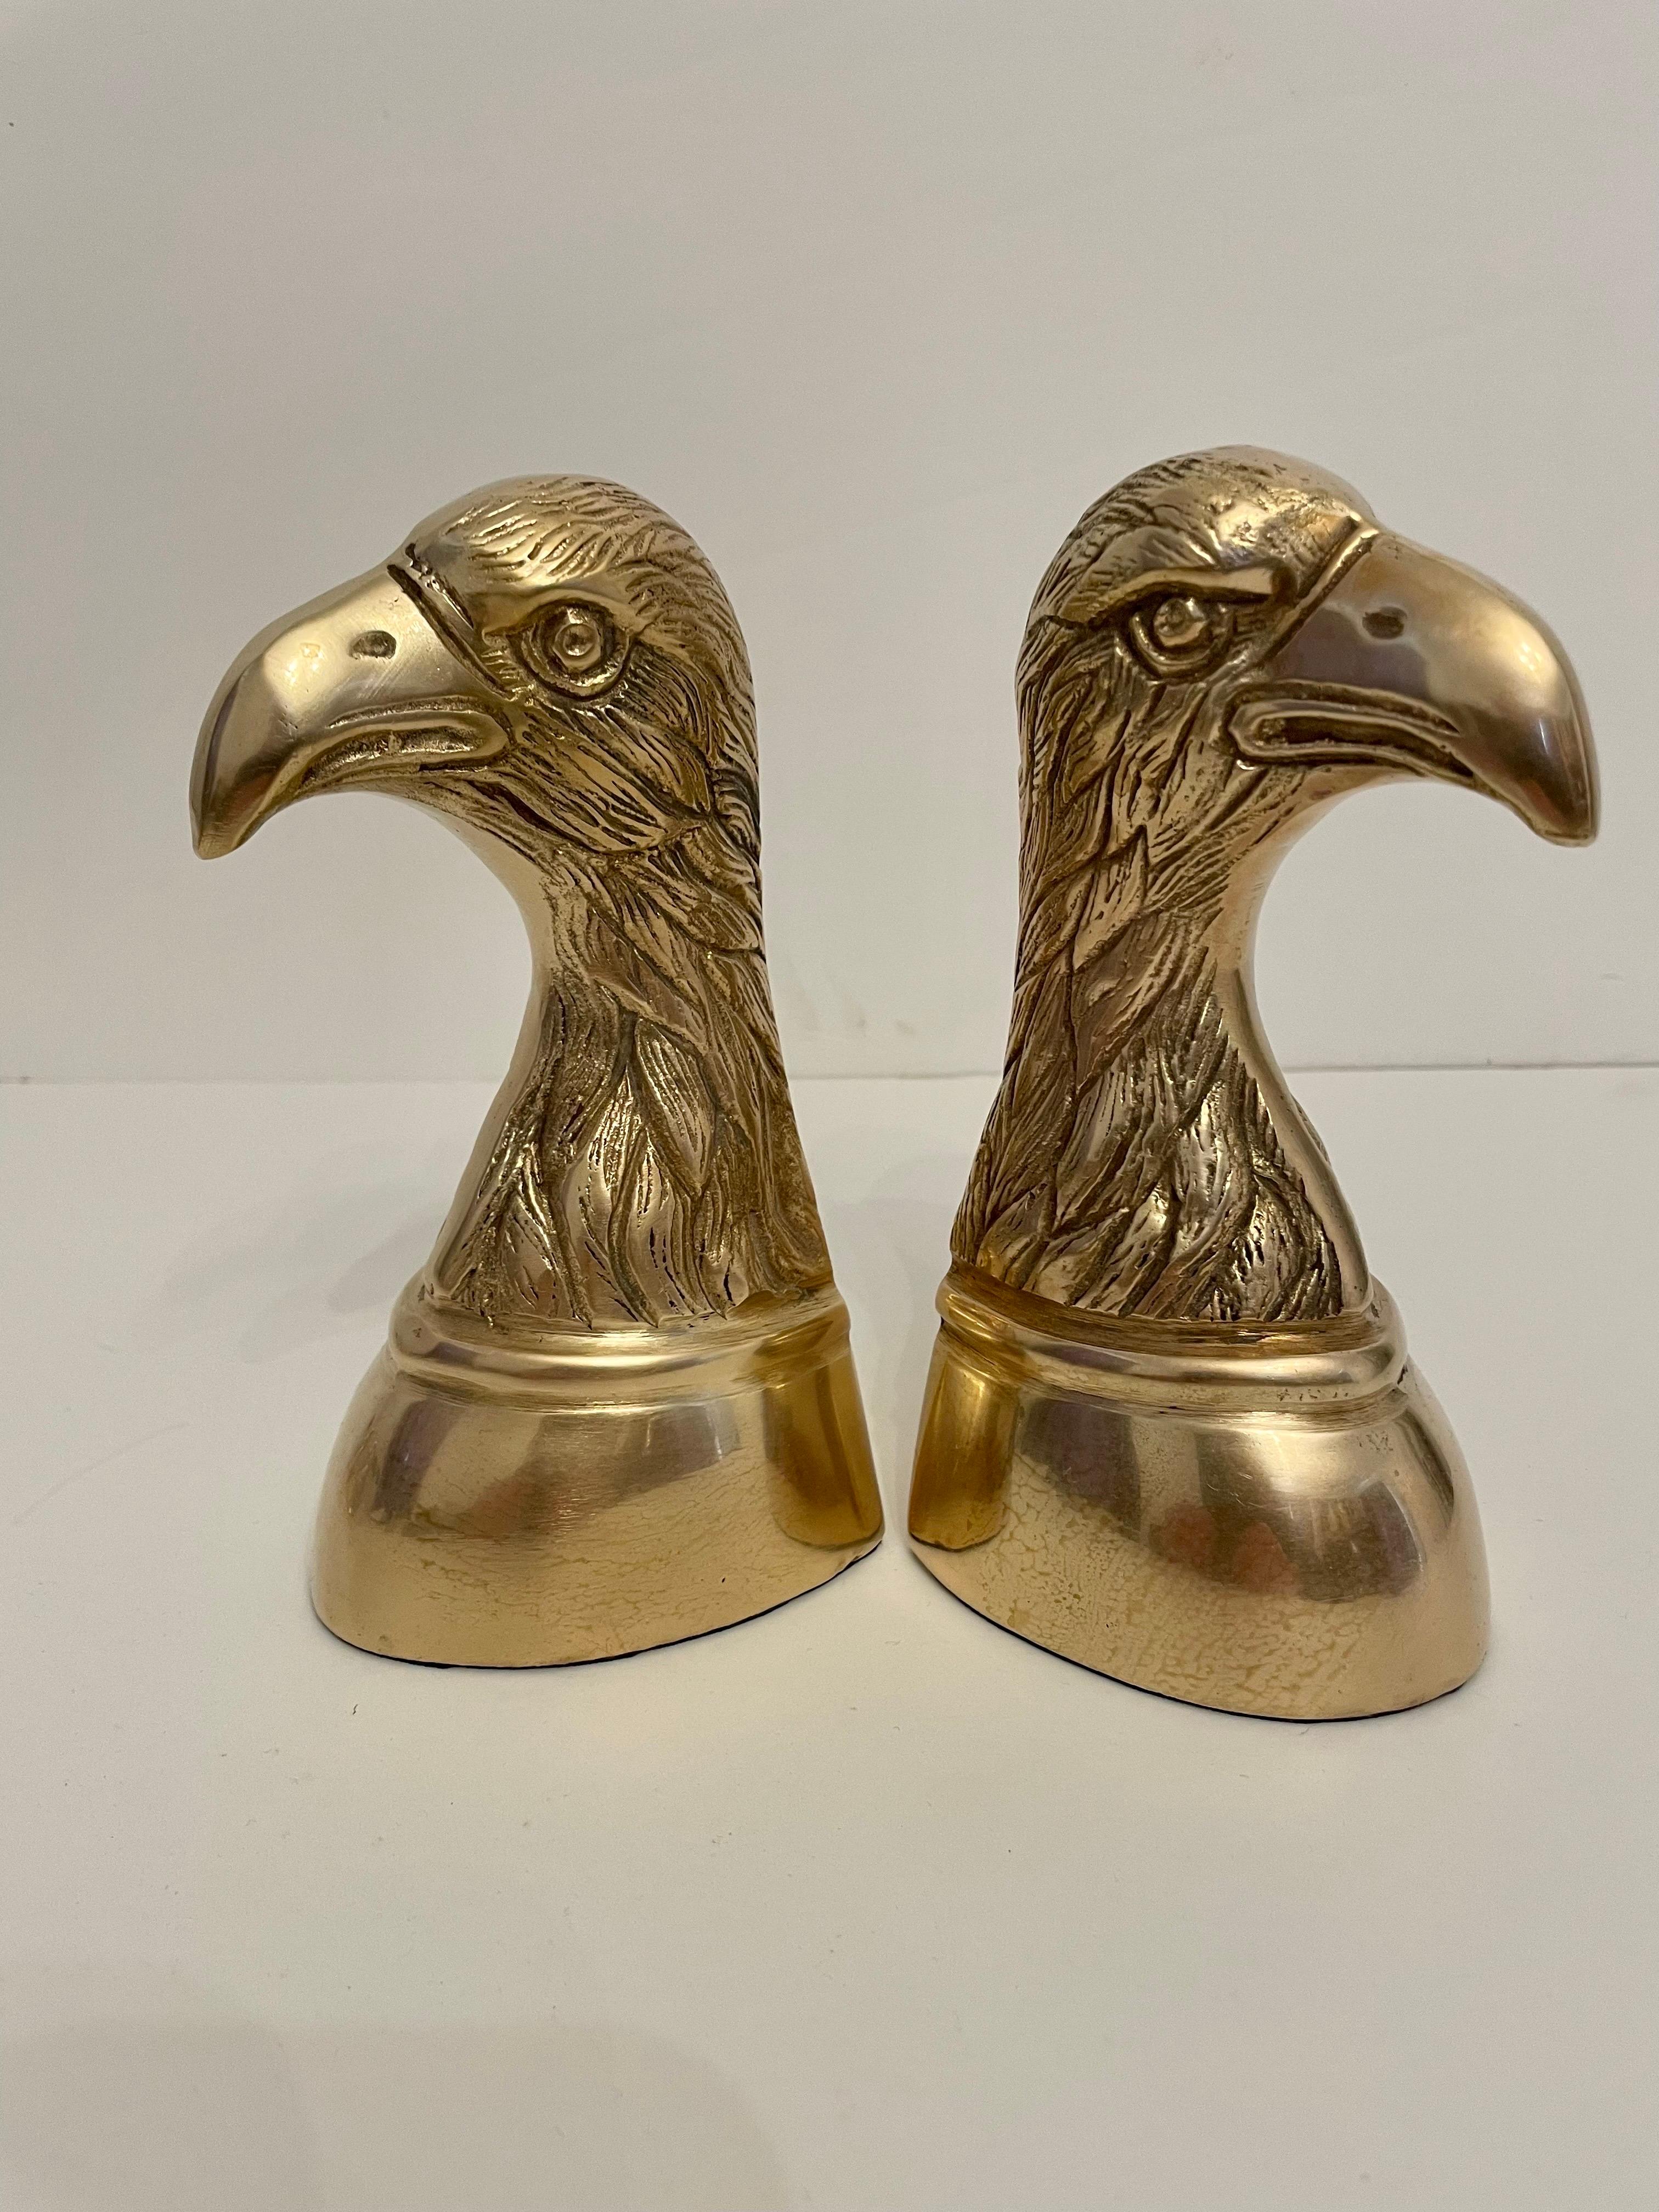 Nice set of heavy brass Eagle bookends. Has thin felt on bottom of each to prevent scratching furniture. Great on a book shelf or desk. Nice condition, hand polished, ready to use. 6.5” tall 3.25 deep x 3.25” wide. Any dark or light spots is